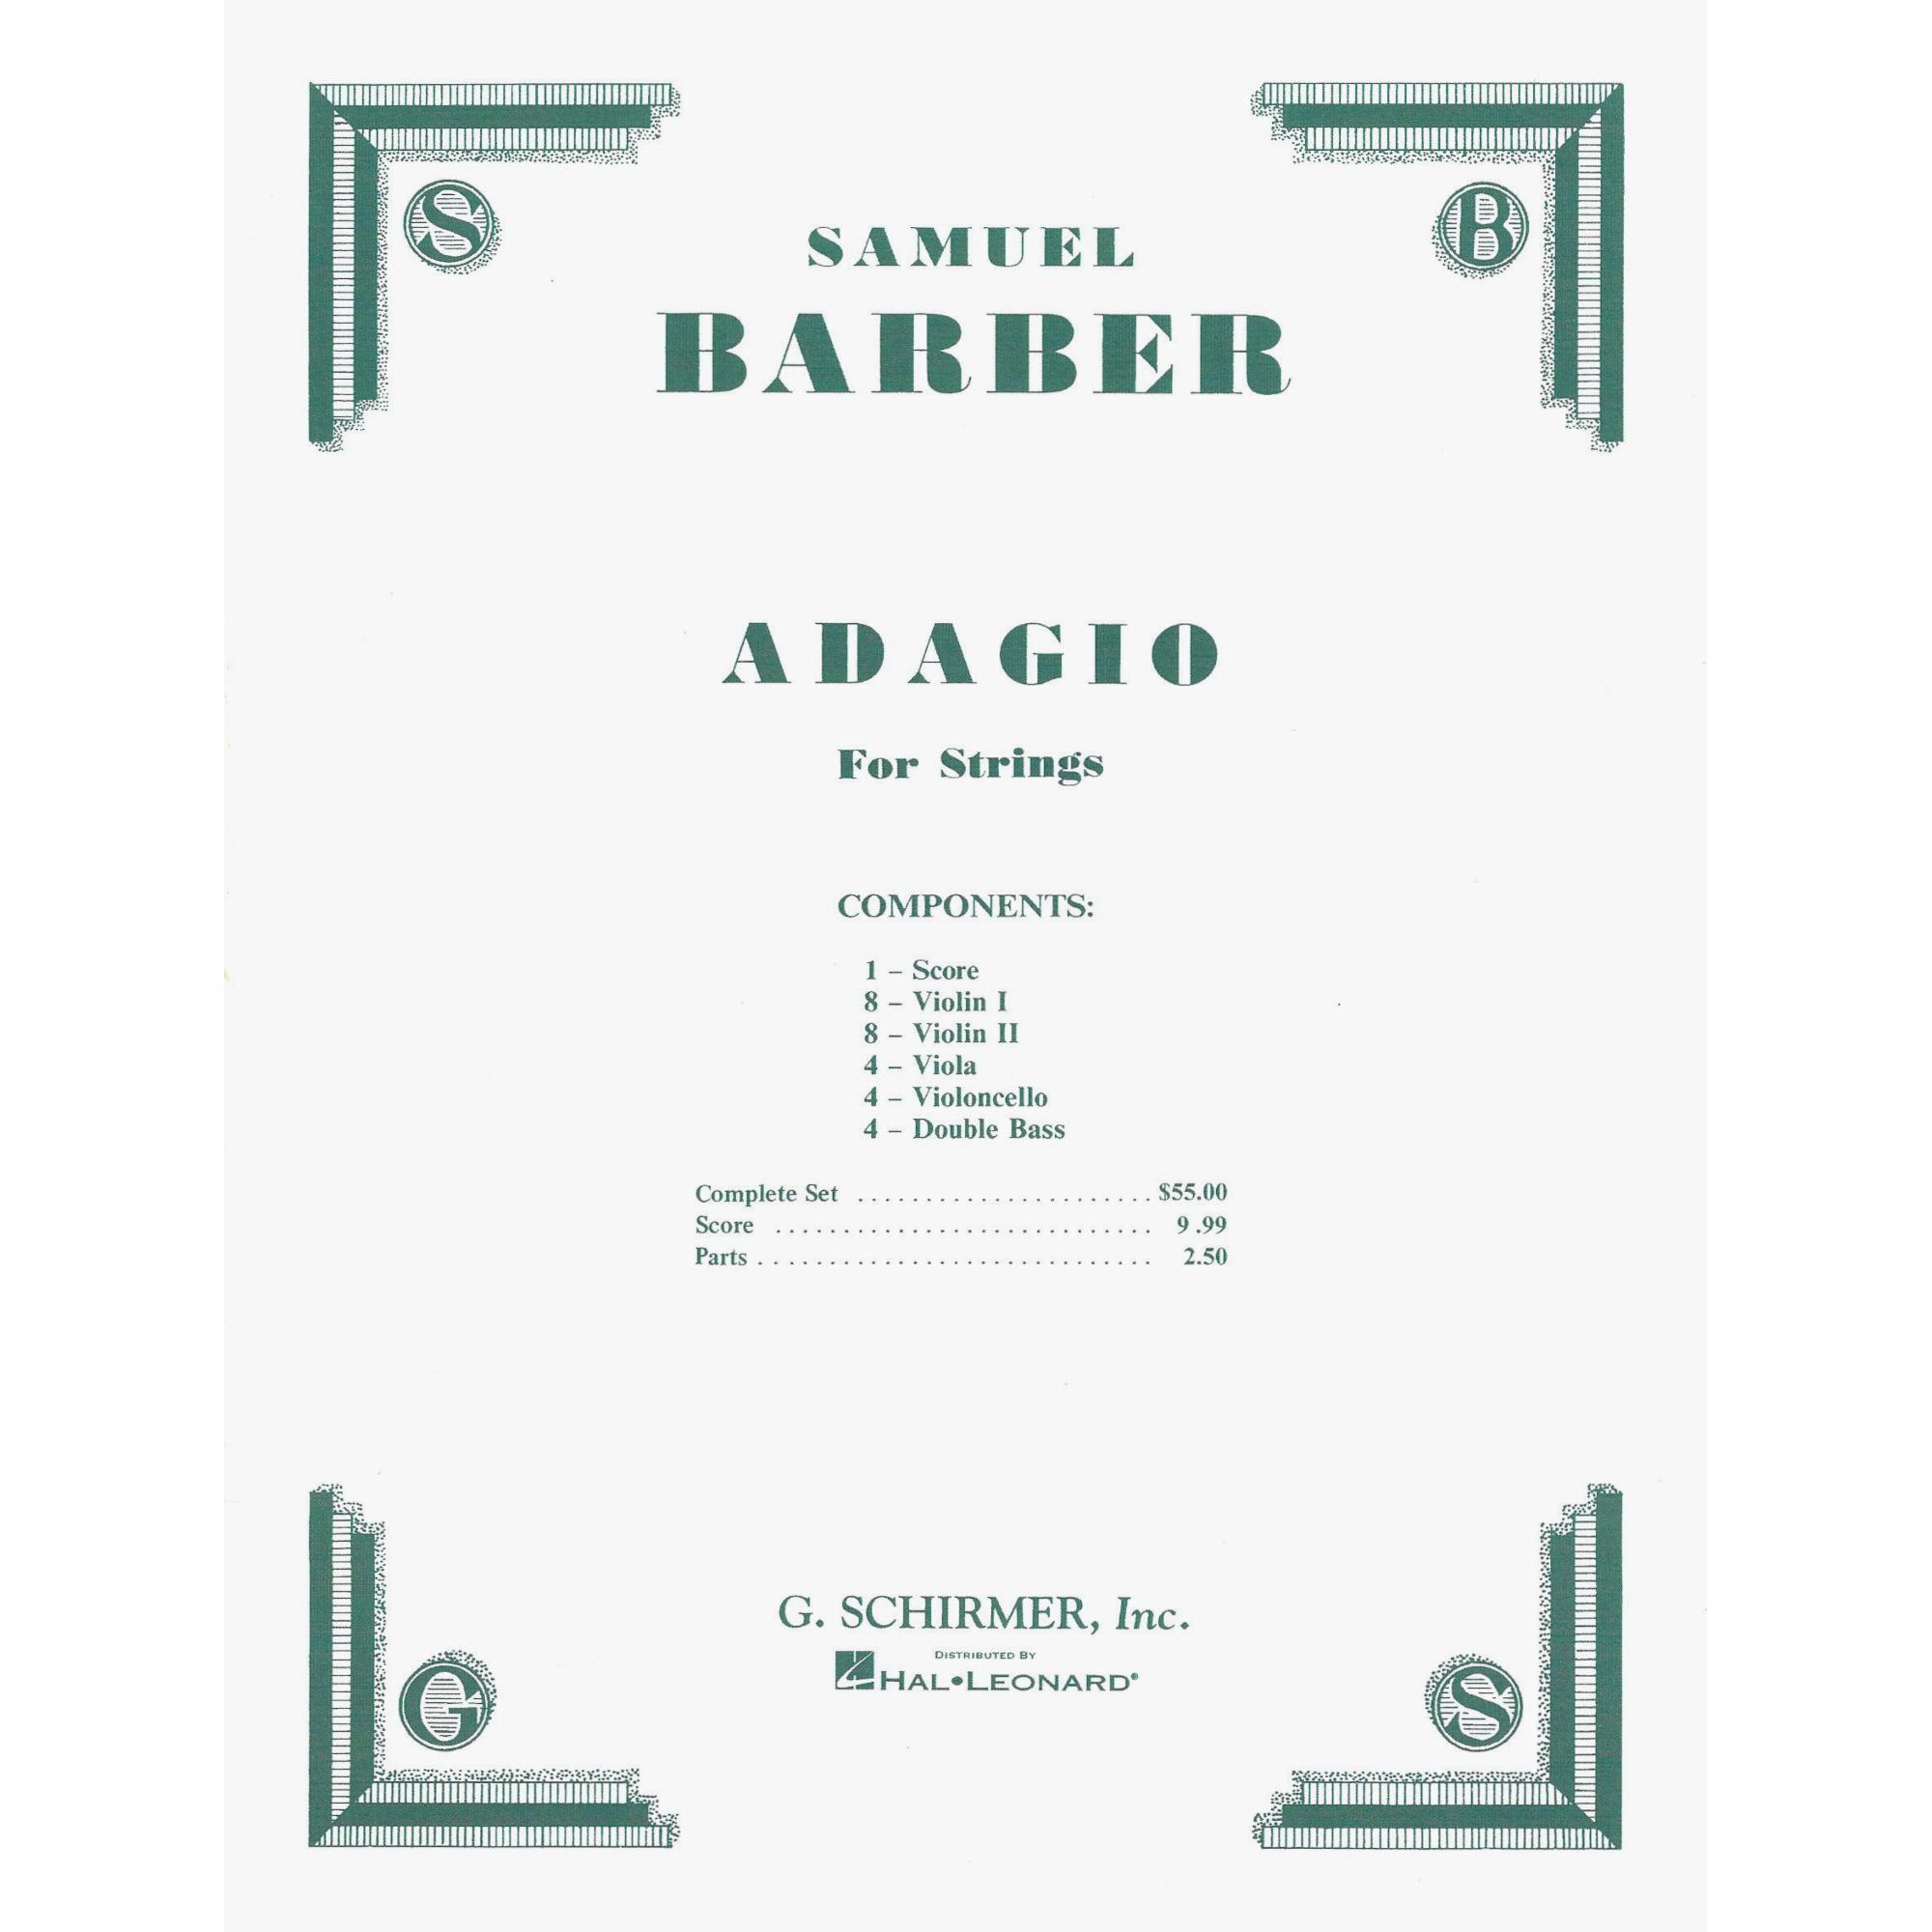 Barber -- Adagio for Strings for String Orchestra